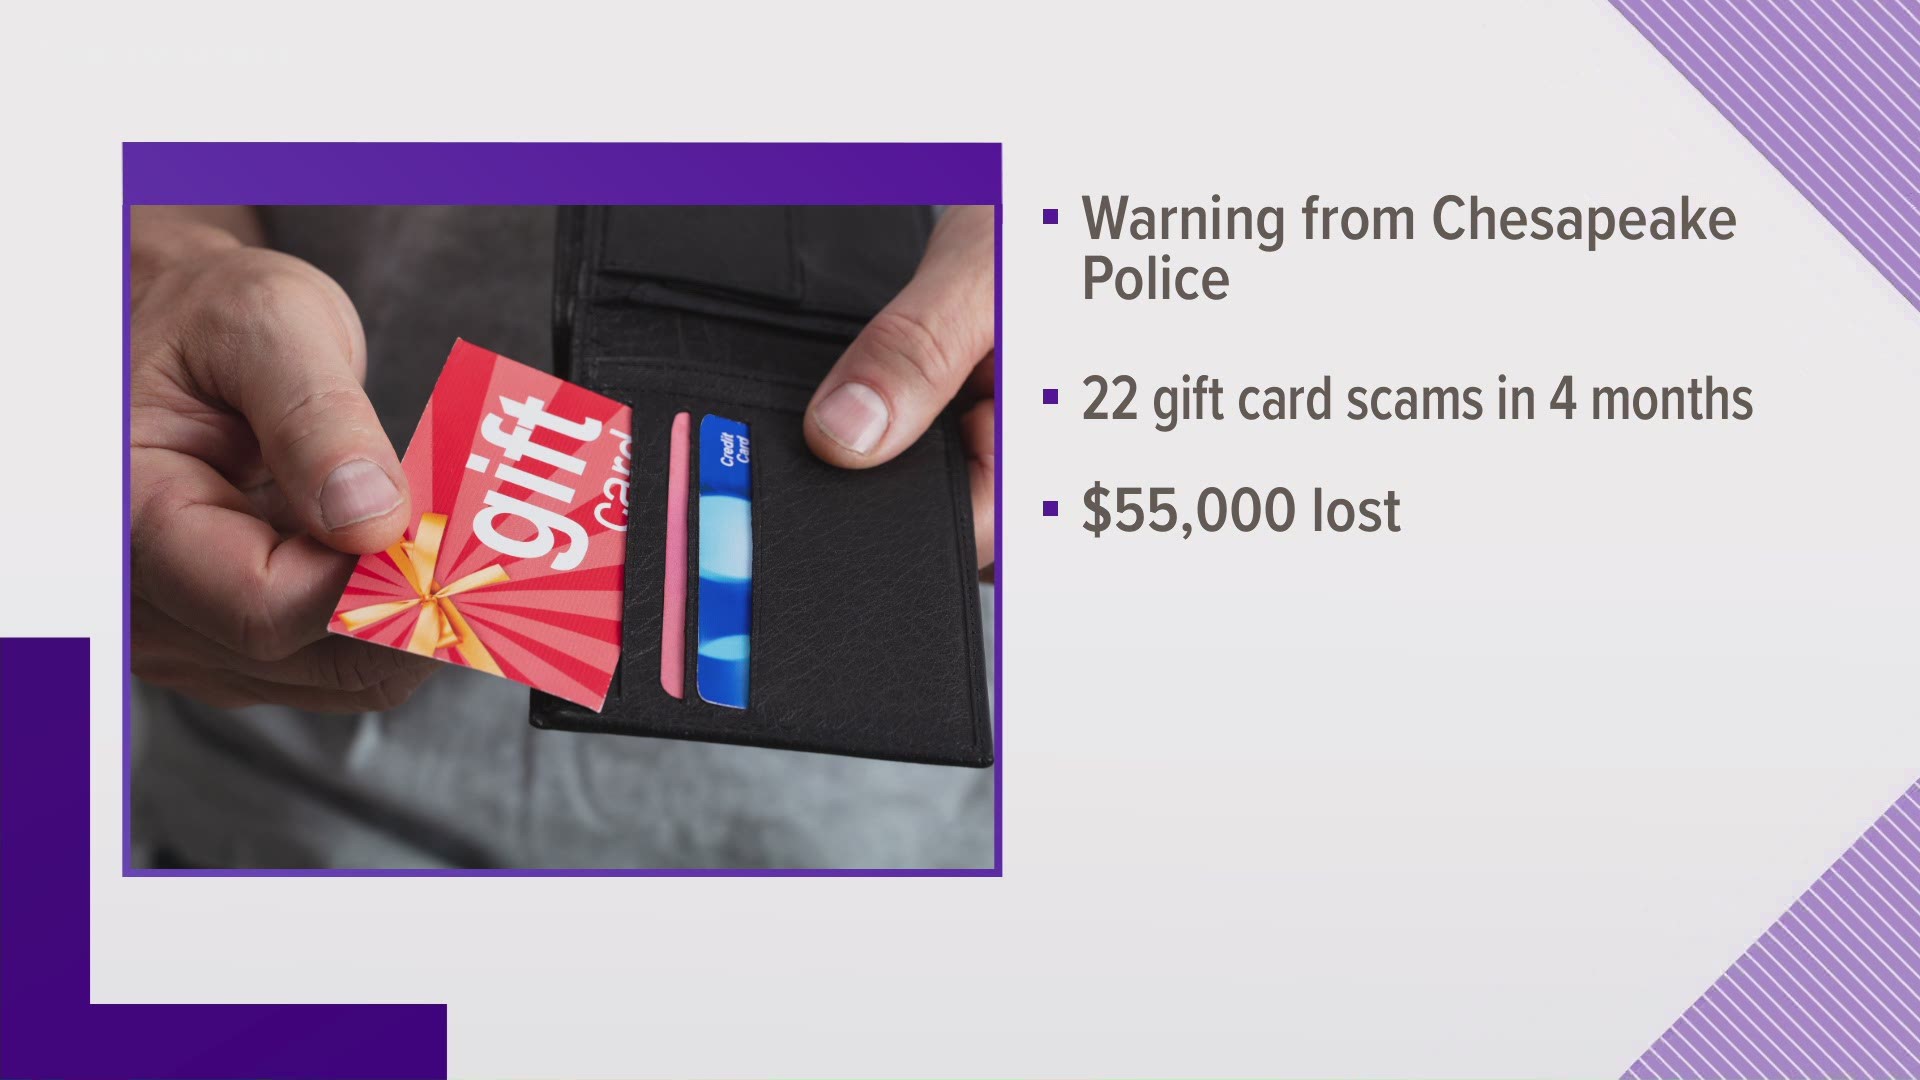 Chesapeake police say they've received about two dozen reports of gift card scams in the past four months.